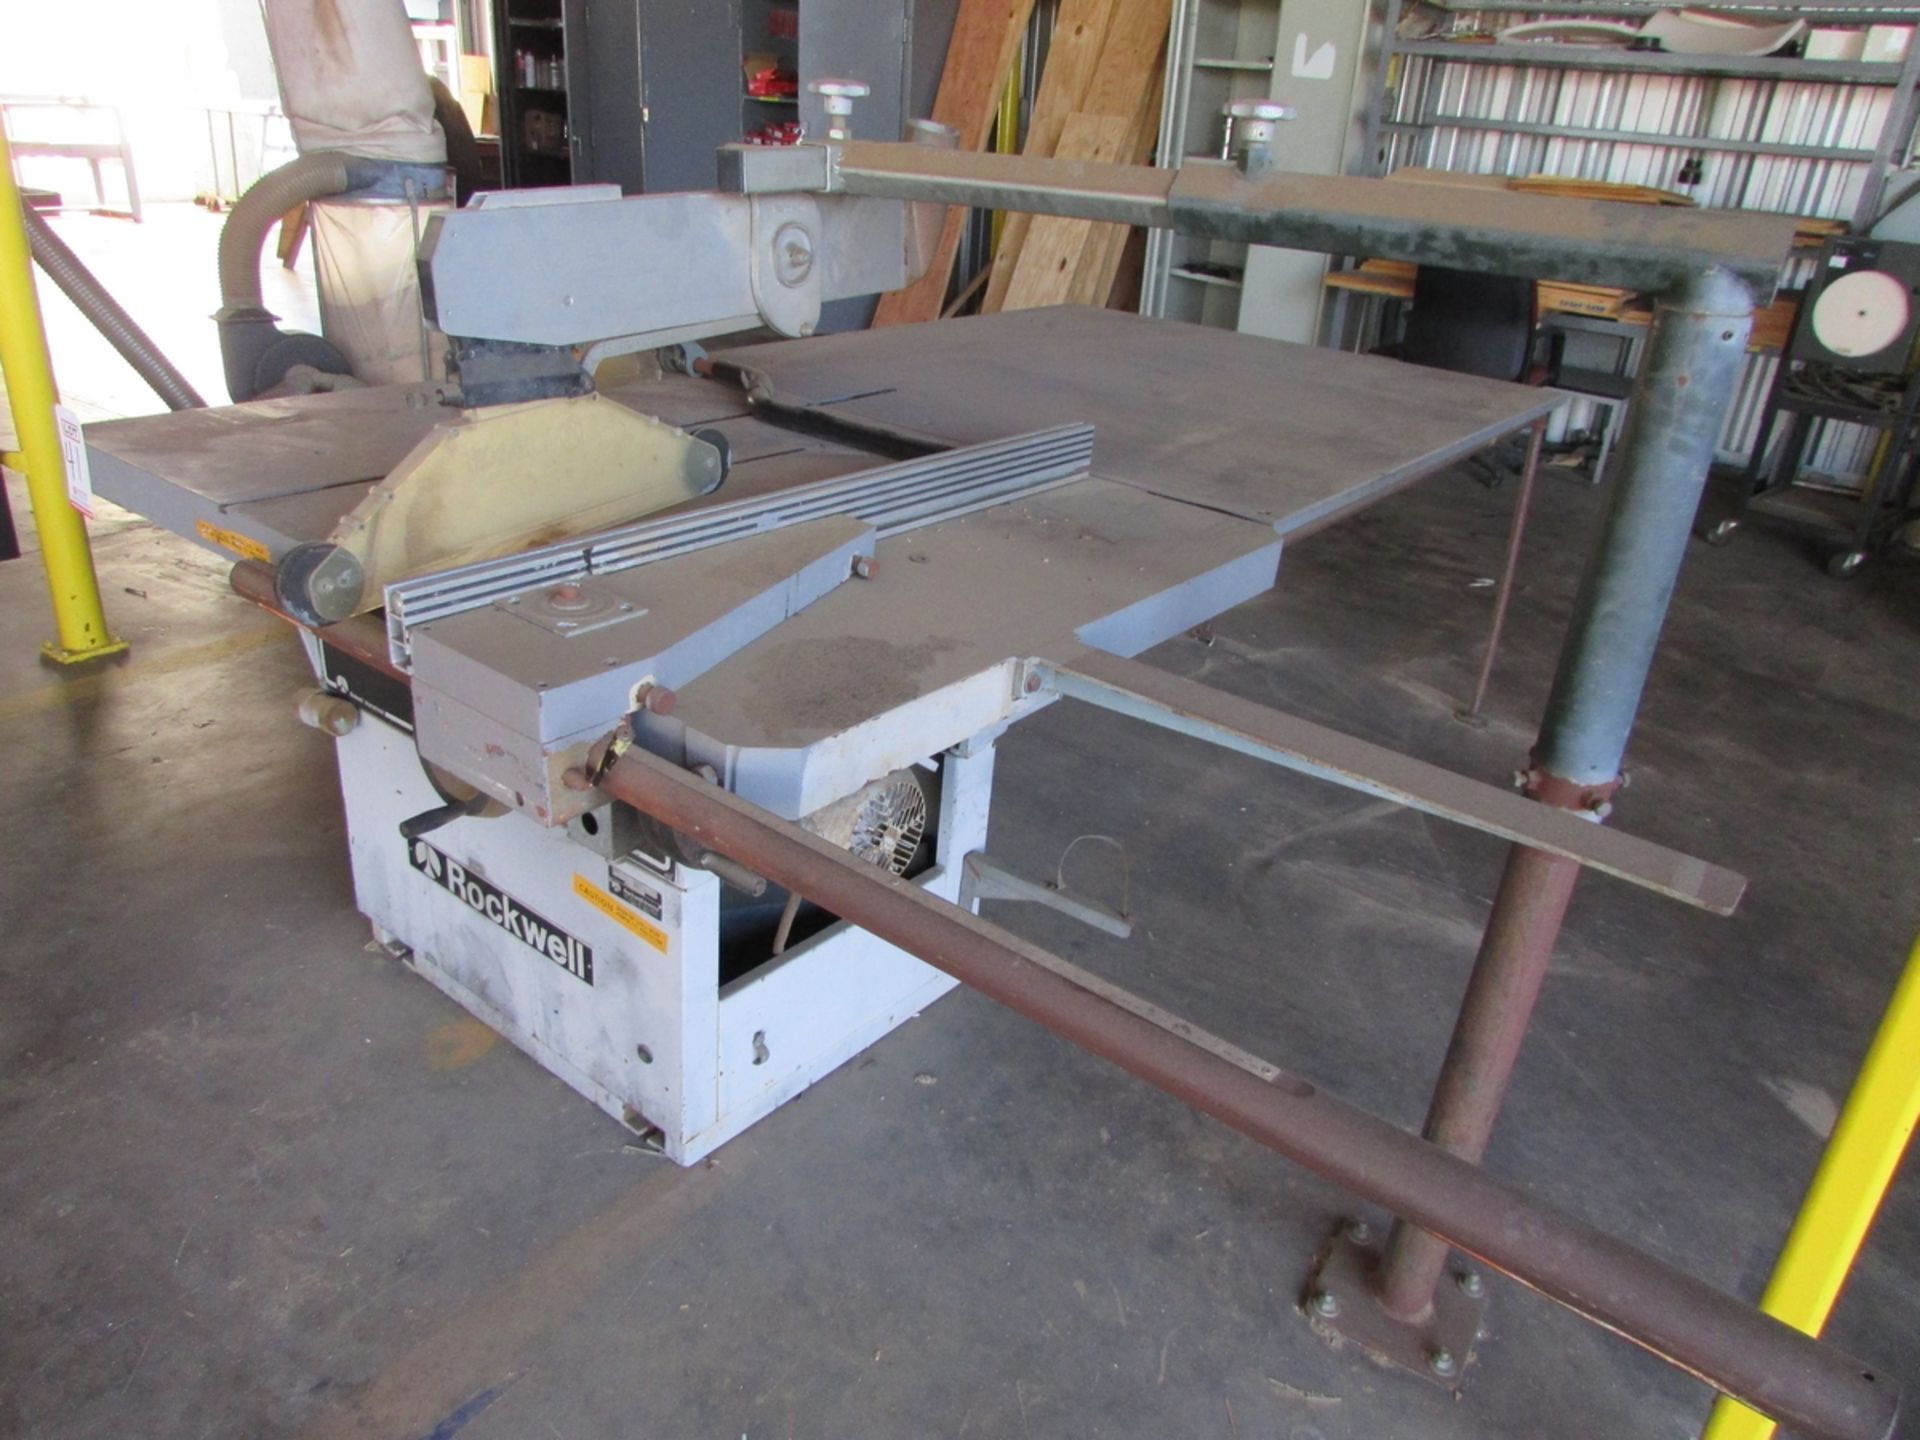 ROCKWELL INVICTA 12" TILTING ARBOR TABLE SAW, MODEL RT-40, S/N 1012, ALTENDORF WA107 GUARD, 60" X - Image 6 of 10